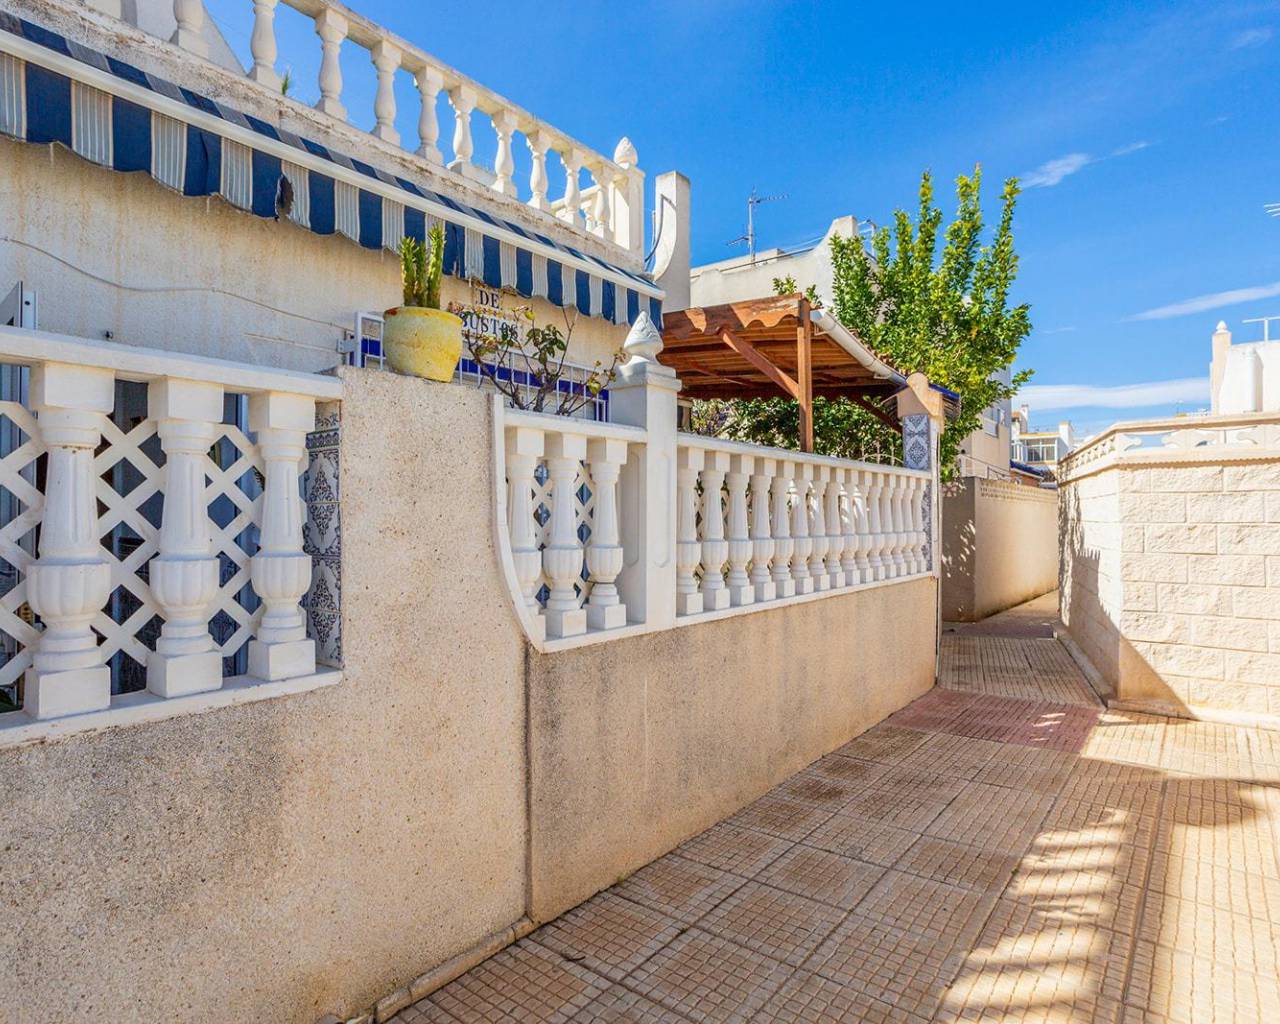 Sale - Single family house - Torrevieja - Doña ines